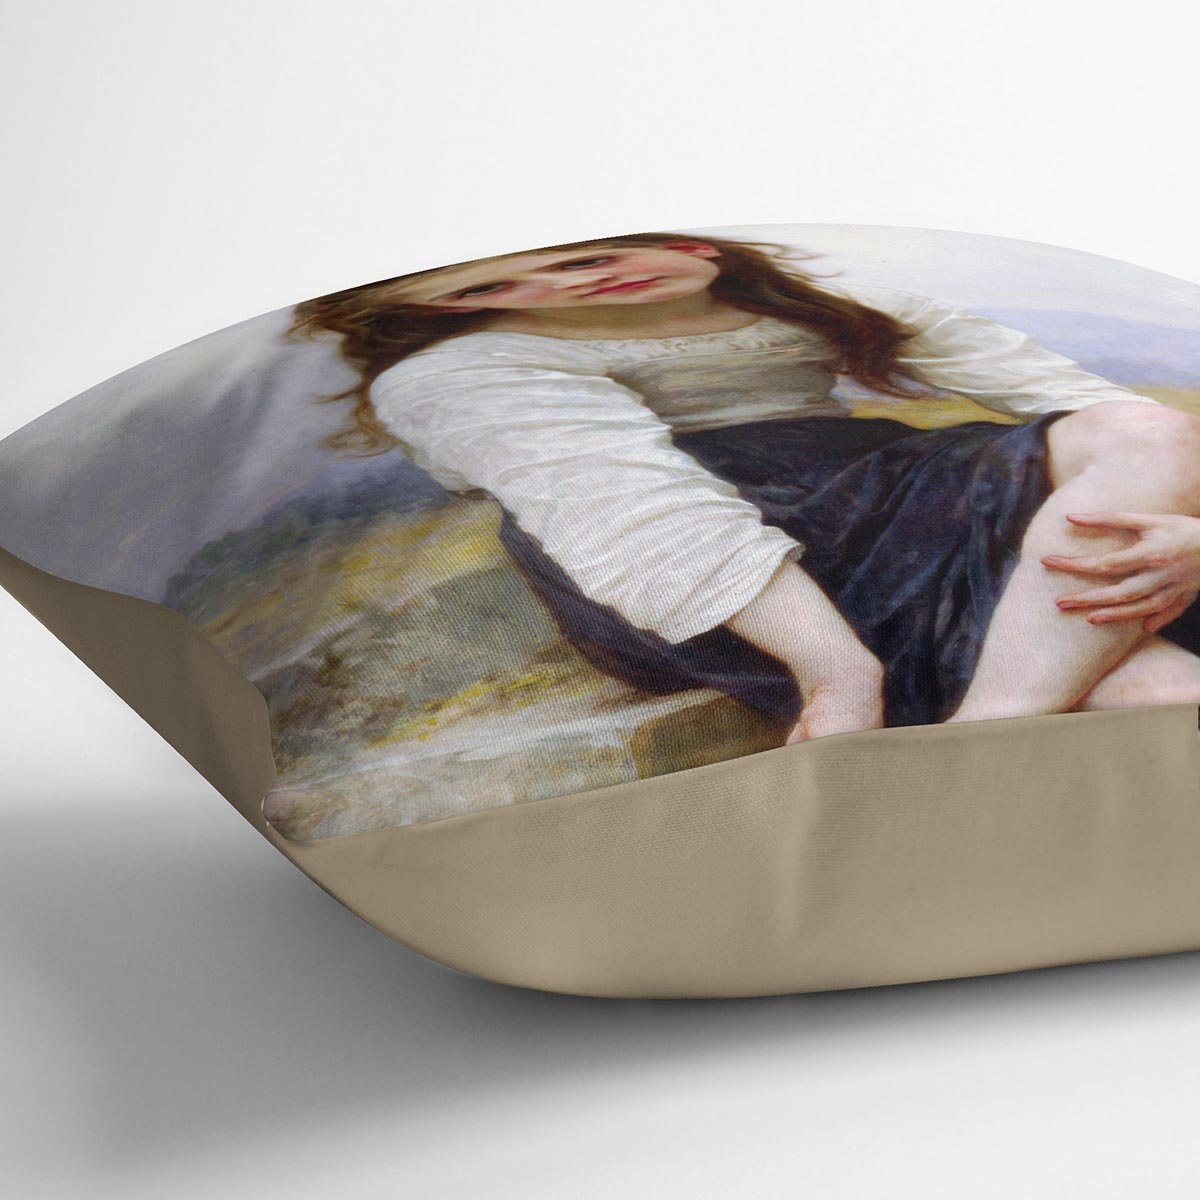 Before The Bath By Bouguereau Throw Pillow